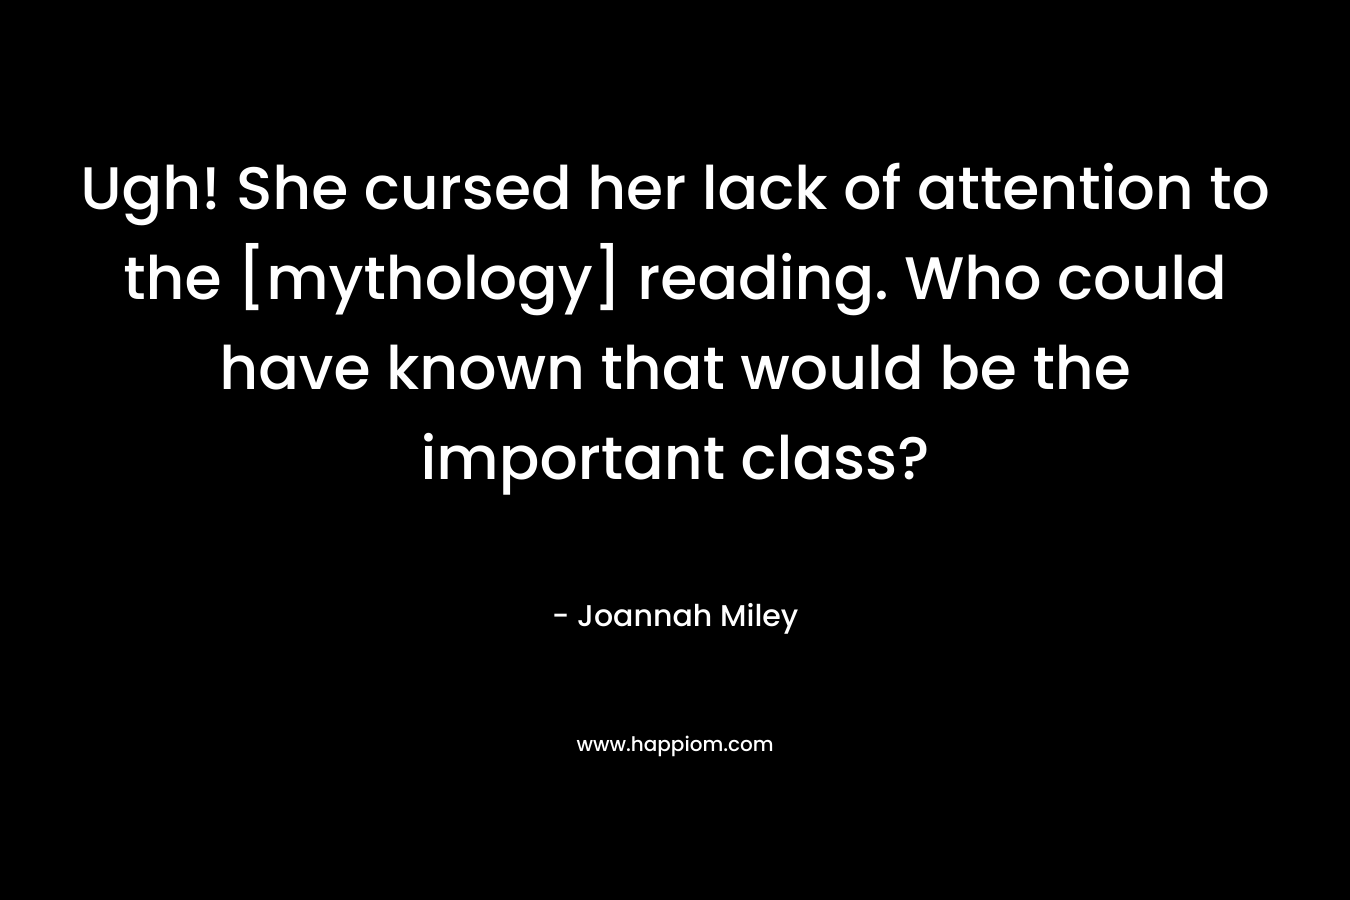 Ugh! She cursed her lack of attention to the [mythology] reading. Who could have known that would be the important class? – Joannah Miley